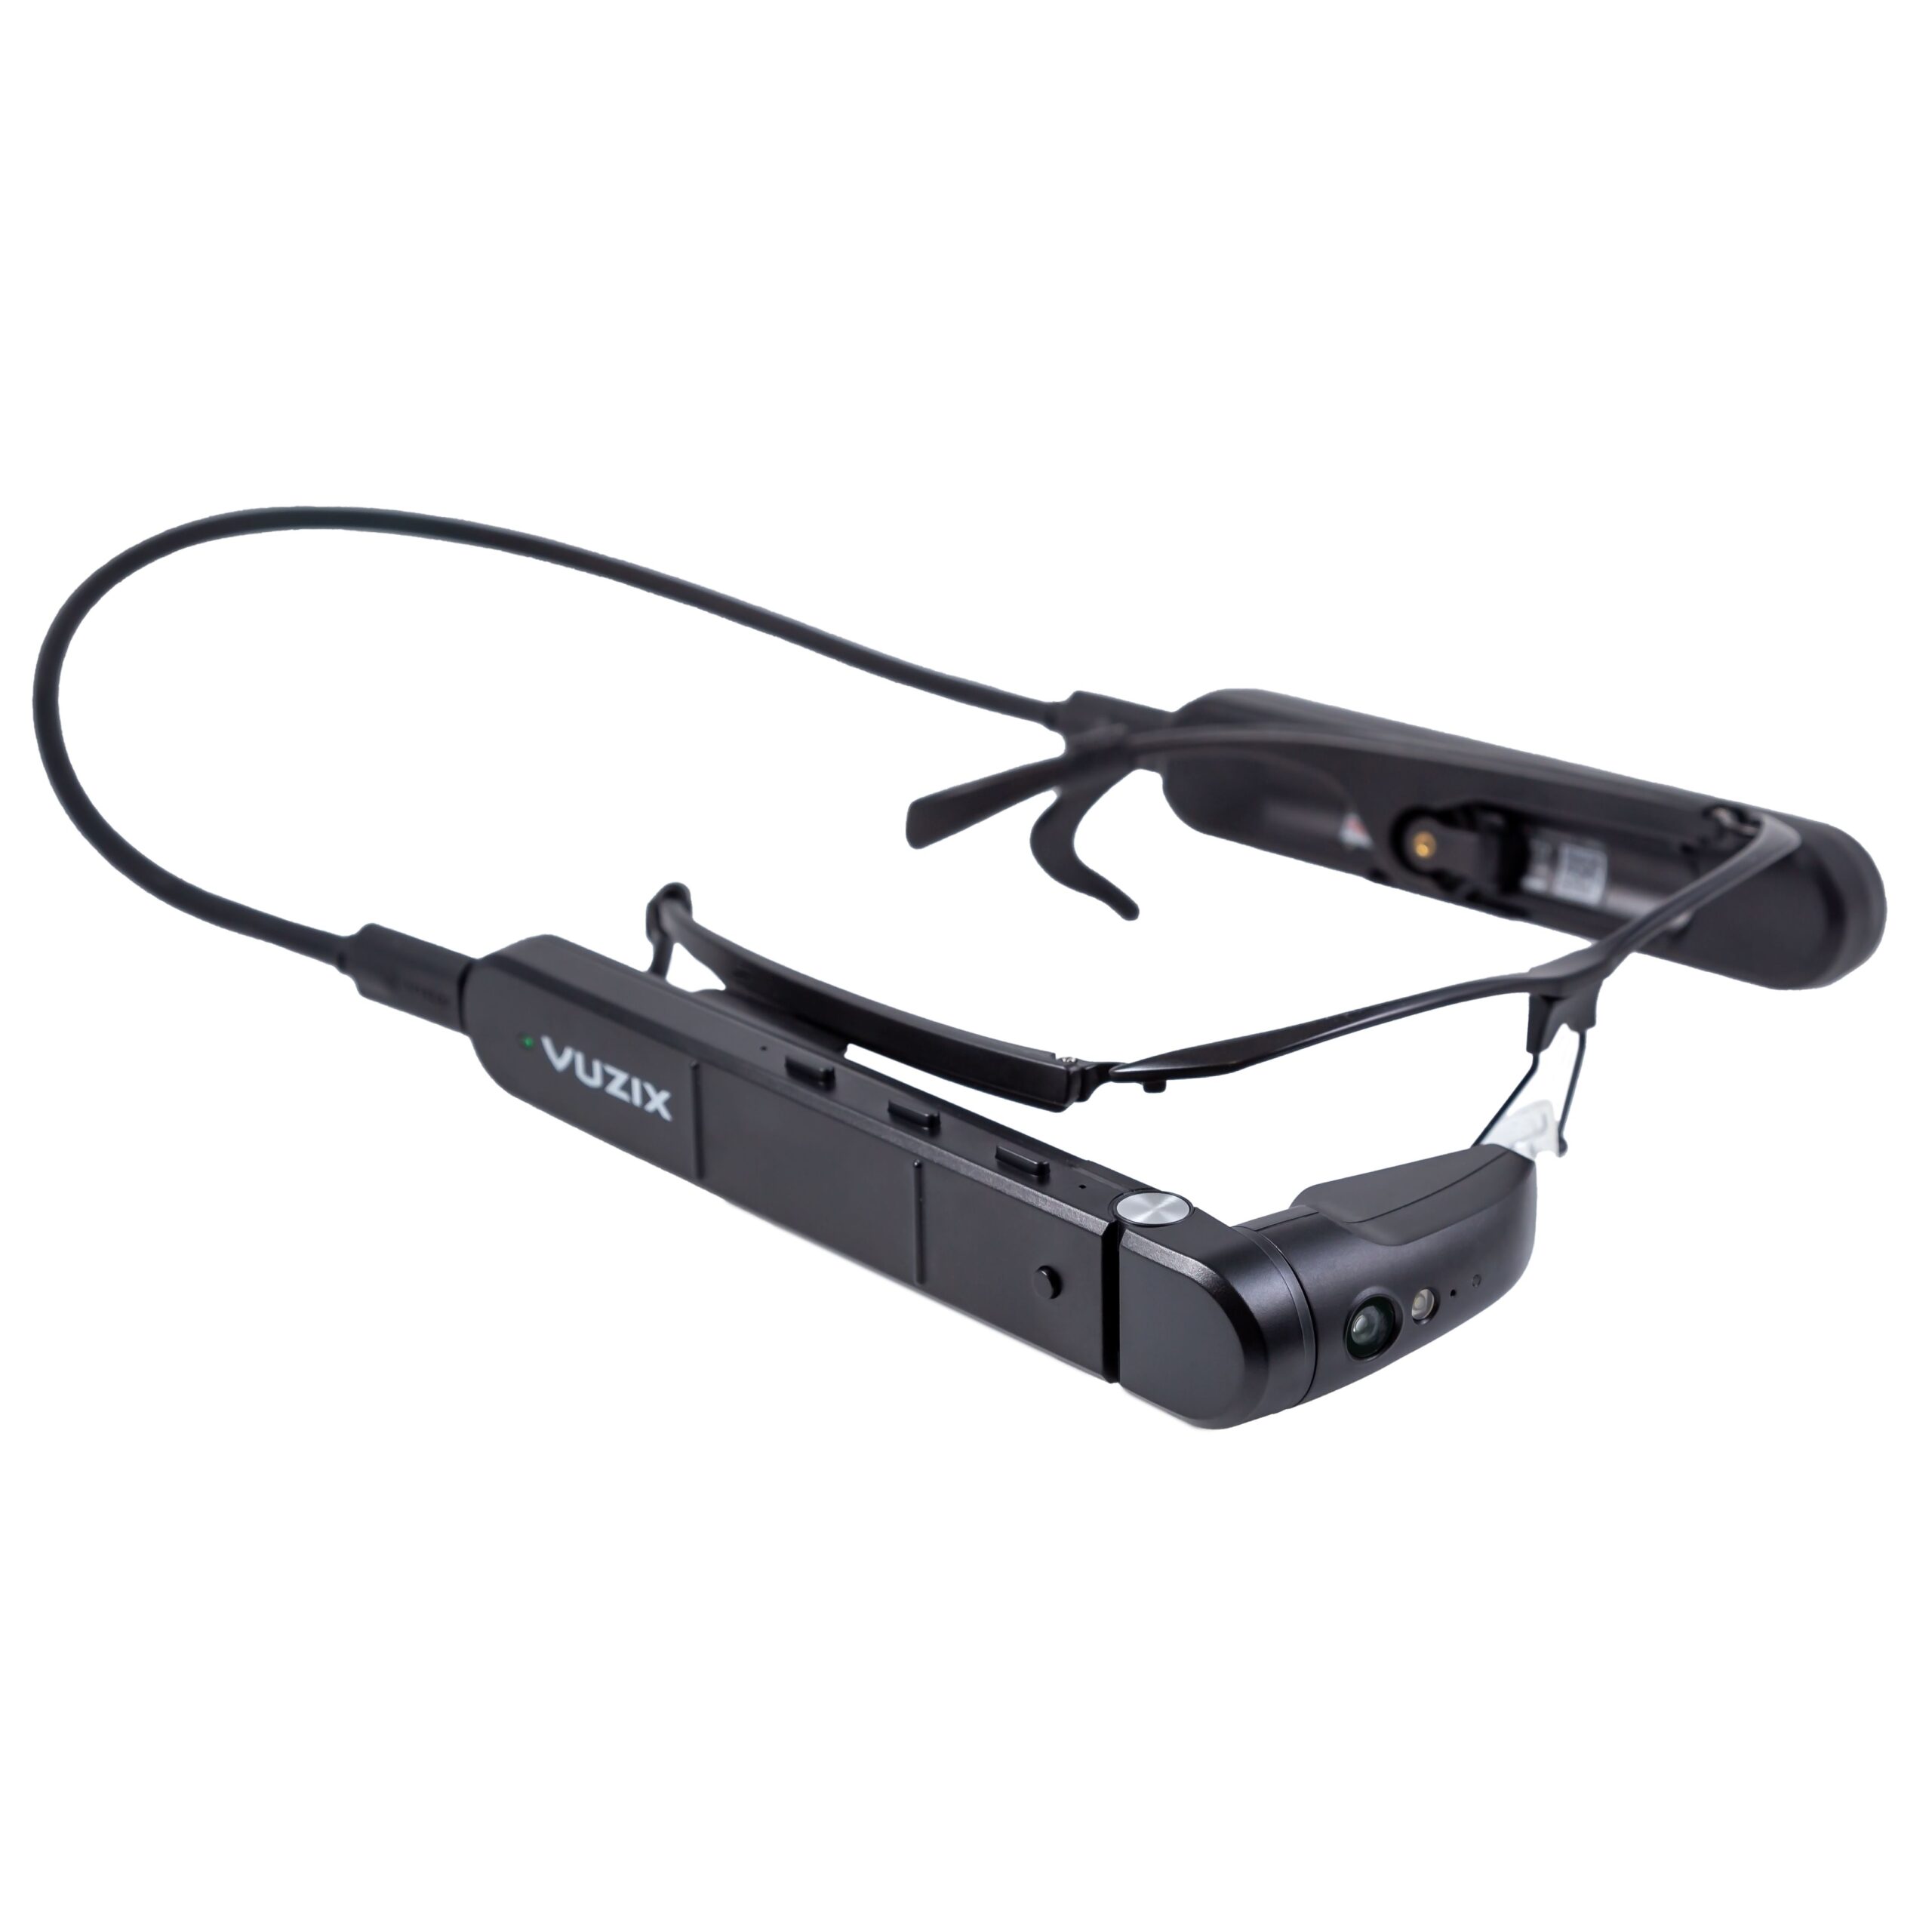 Vuzix Expands HIPAA Compliant Healthcare Offerings with the Addition of Telepresenz from  CARE4D for the M400 Smart Glasses